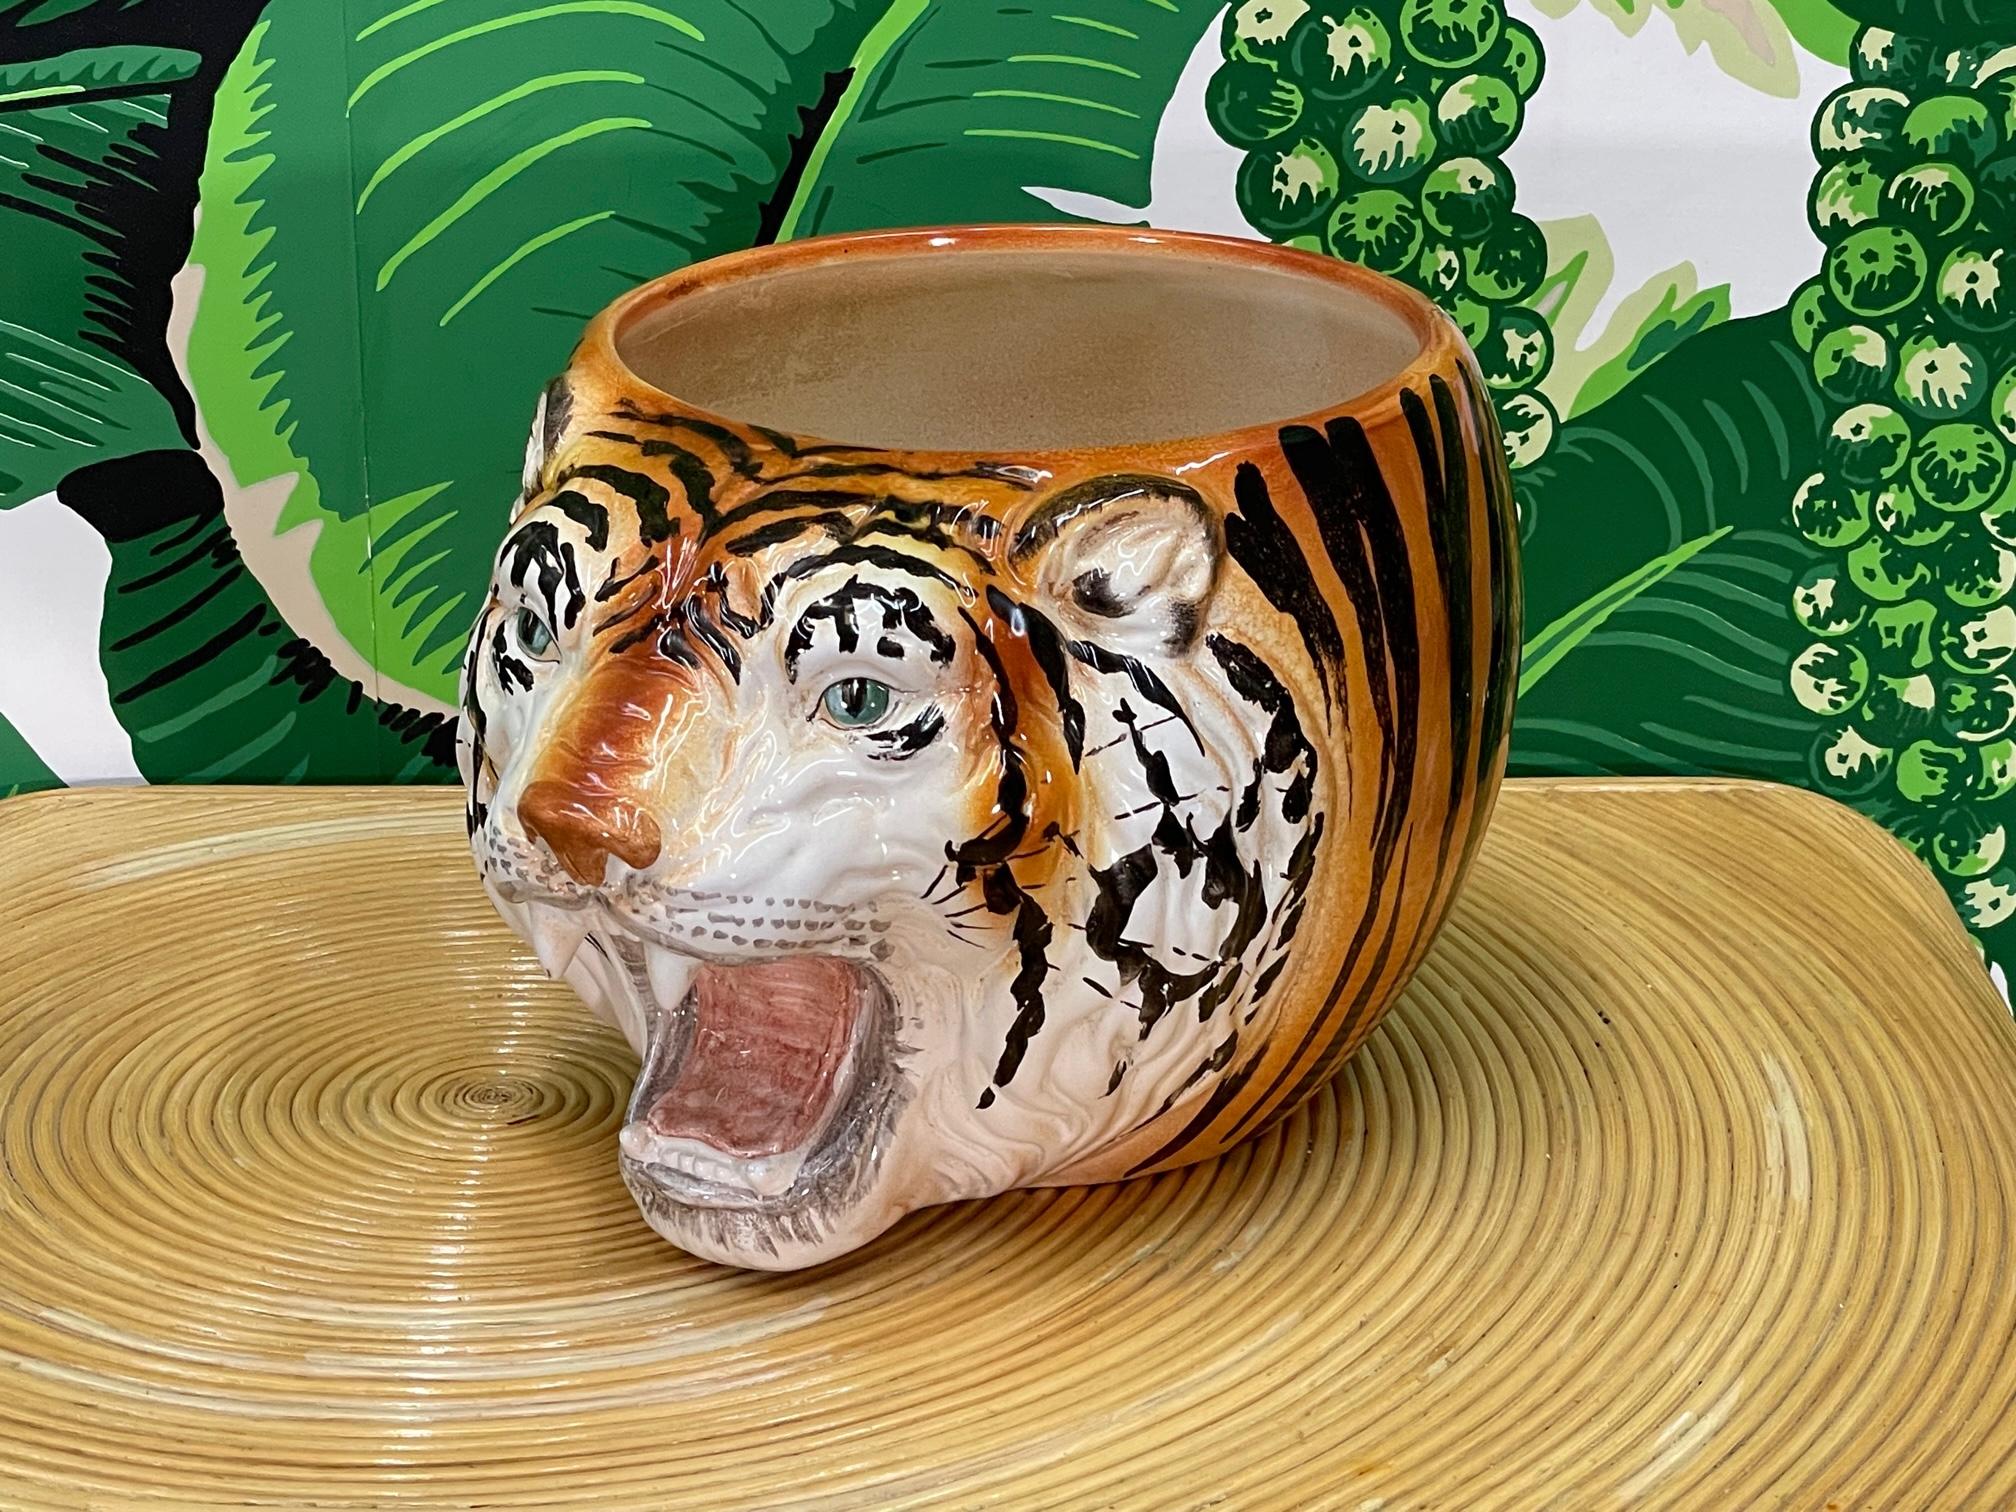 Large ceramic cachepot or bowl made in Italy features a sculptural tiger head motif and a bright, glossy glazed finish. Good condition with minor imperfections consistent with age, see photos for condition details. Some staining inside.
For a